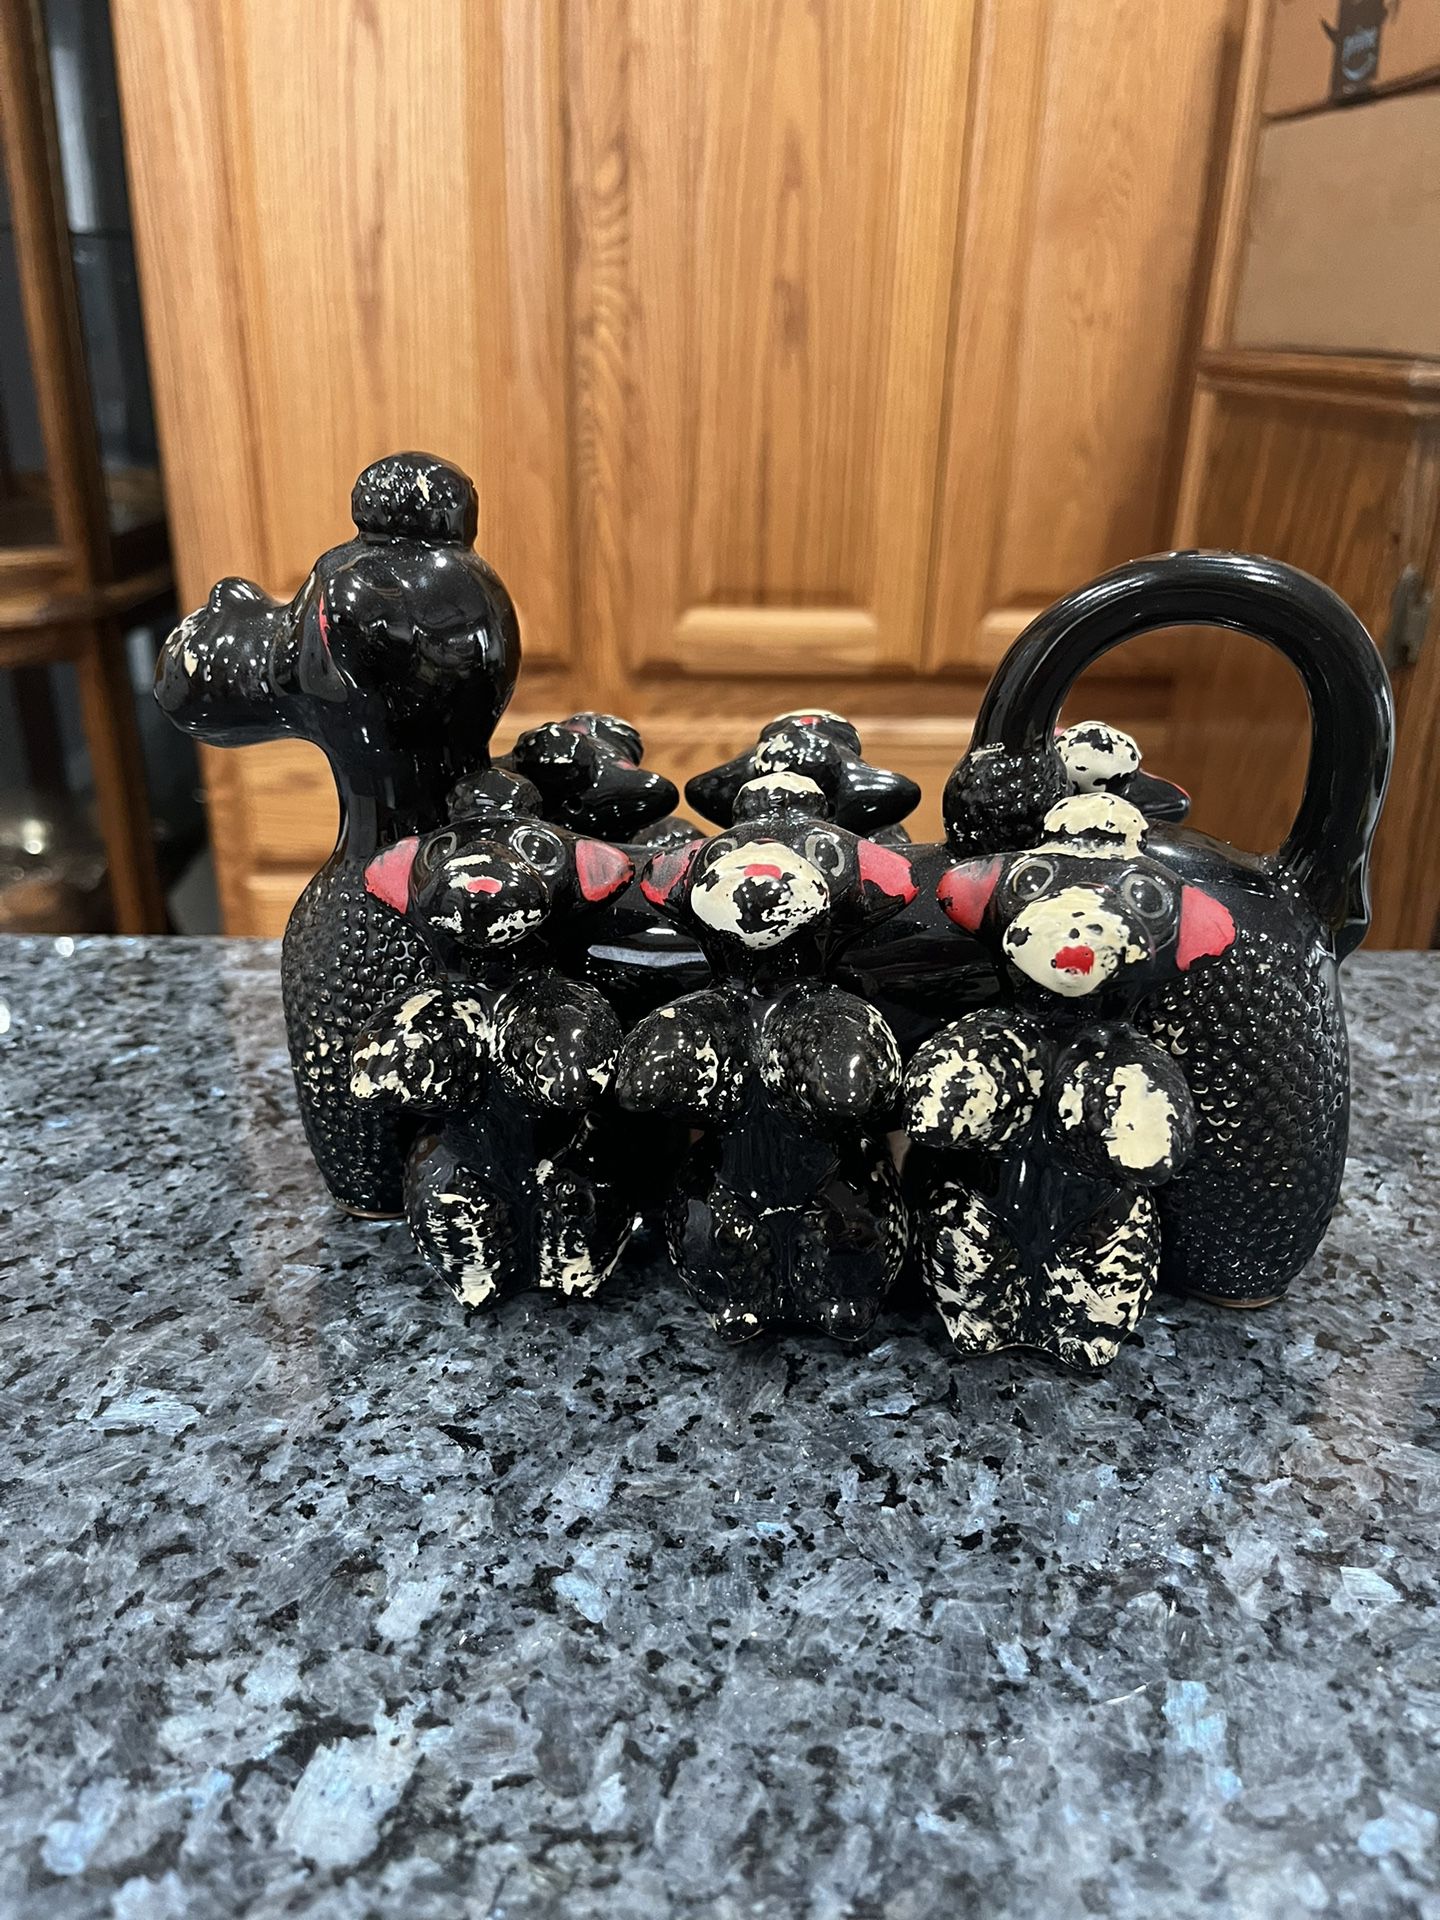  Vintage 1950s Japanese Poodle Spice Rack.  Preowned Some Paint Wear Due  To Age.  